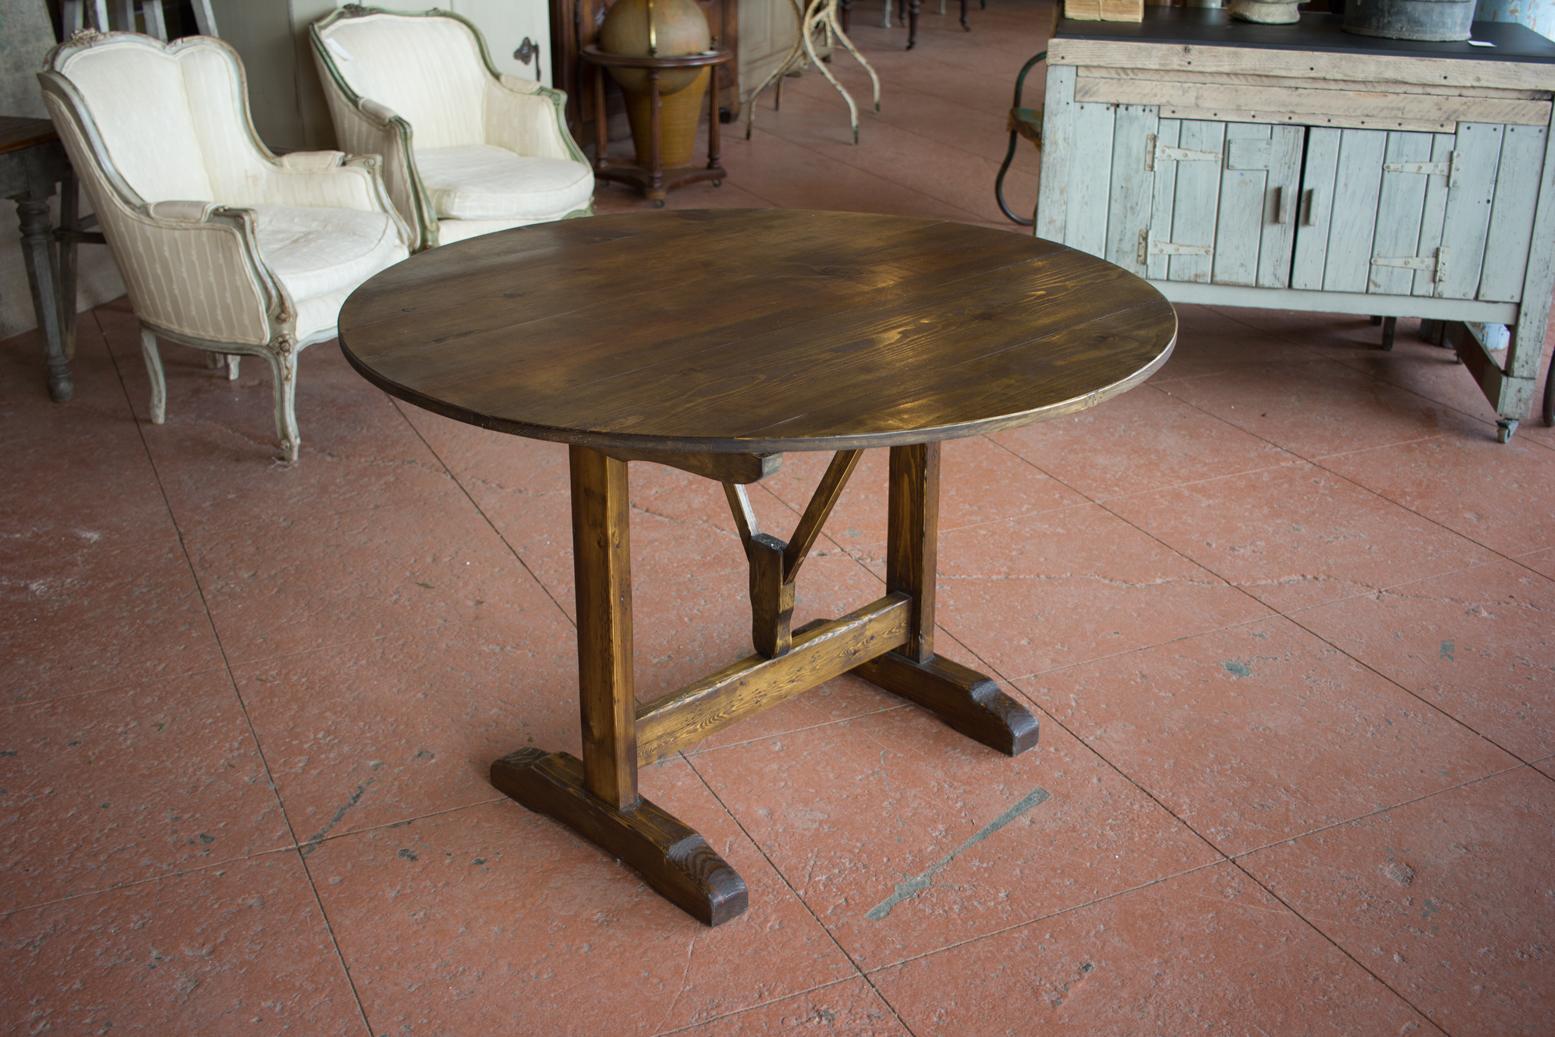 Vintage vendange tilt-top table. Originally these tables were used at a vineyard for testing and tasting the produced wine. It’s a usable storable table that can be used inside or outside for al fresco dining.
    